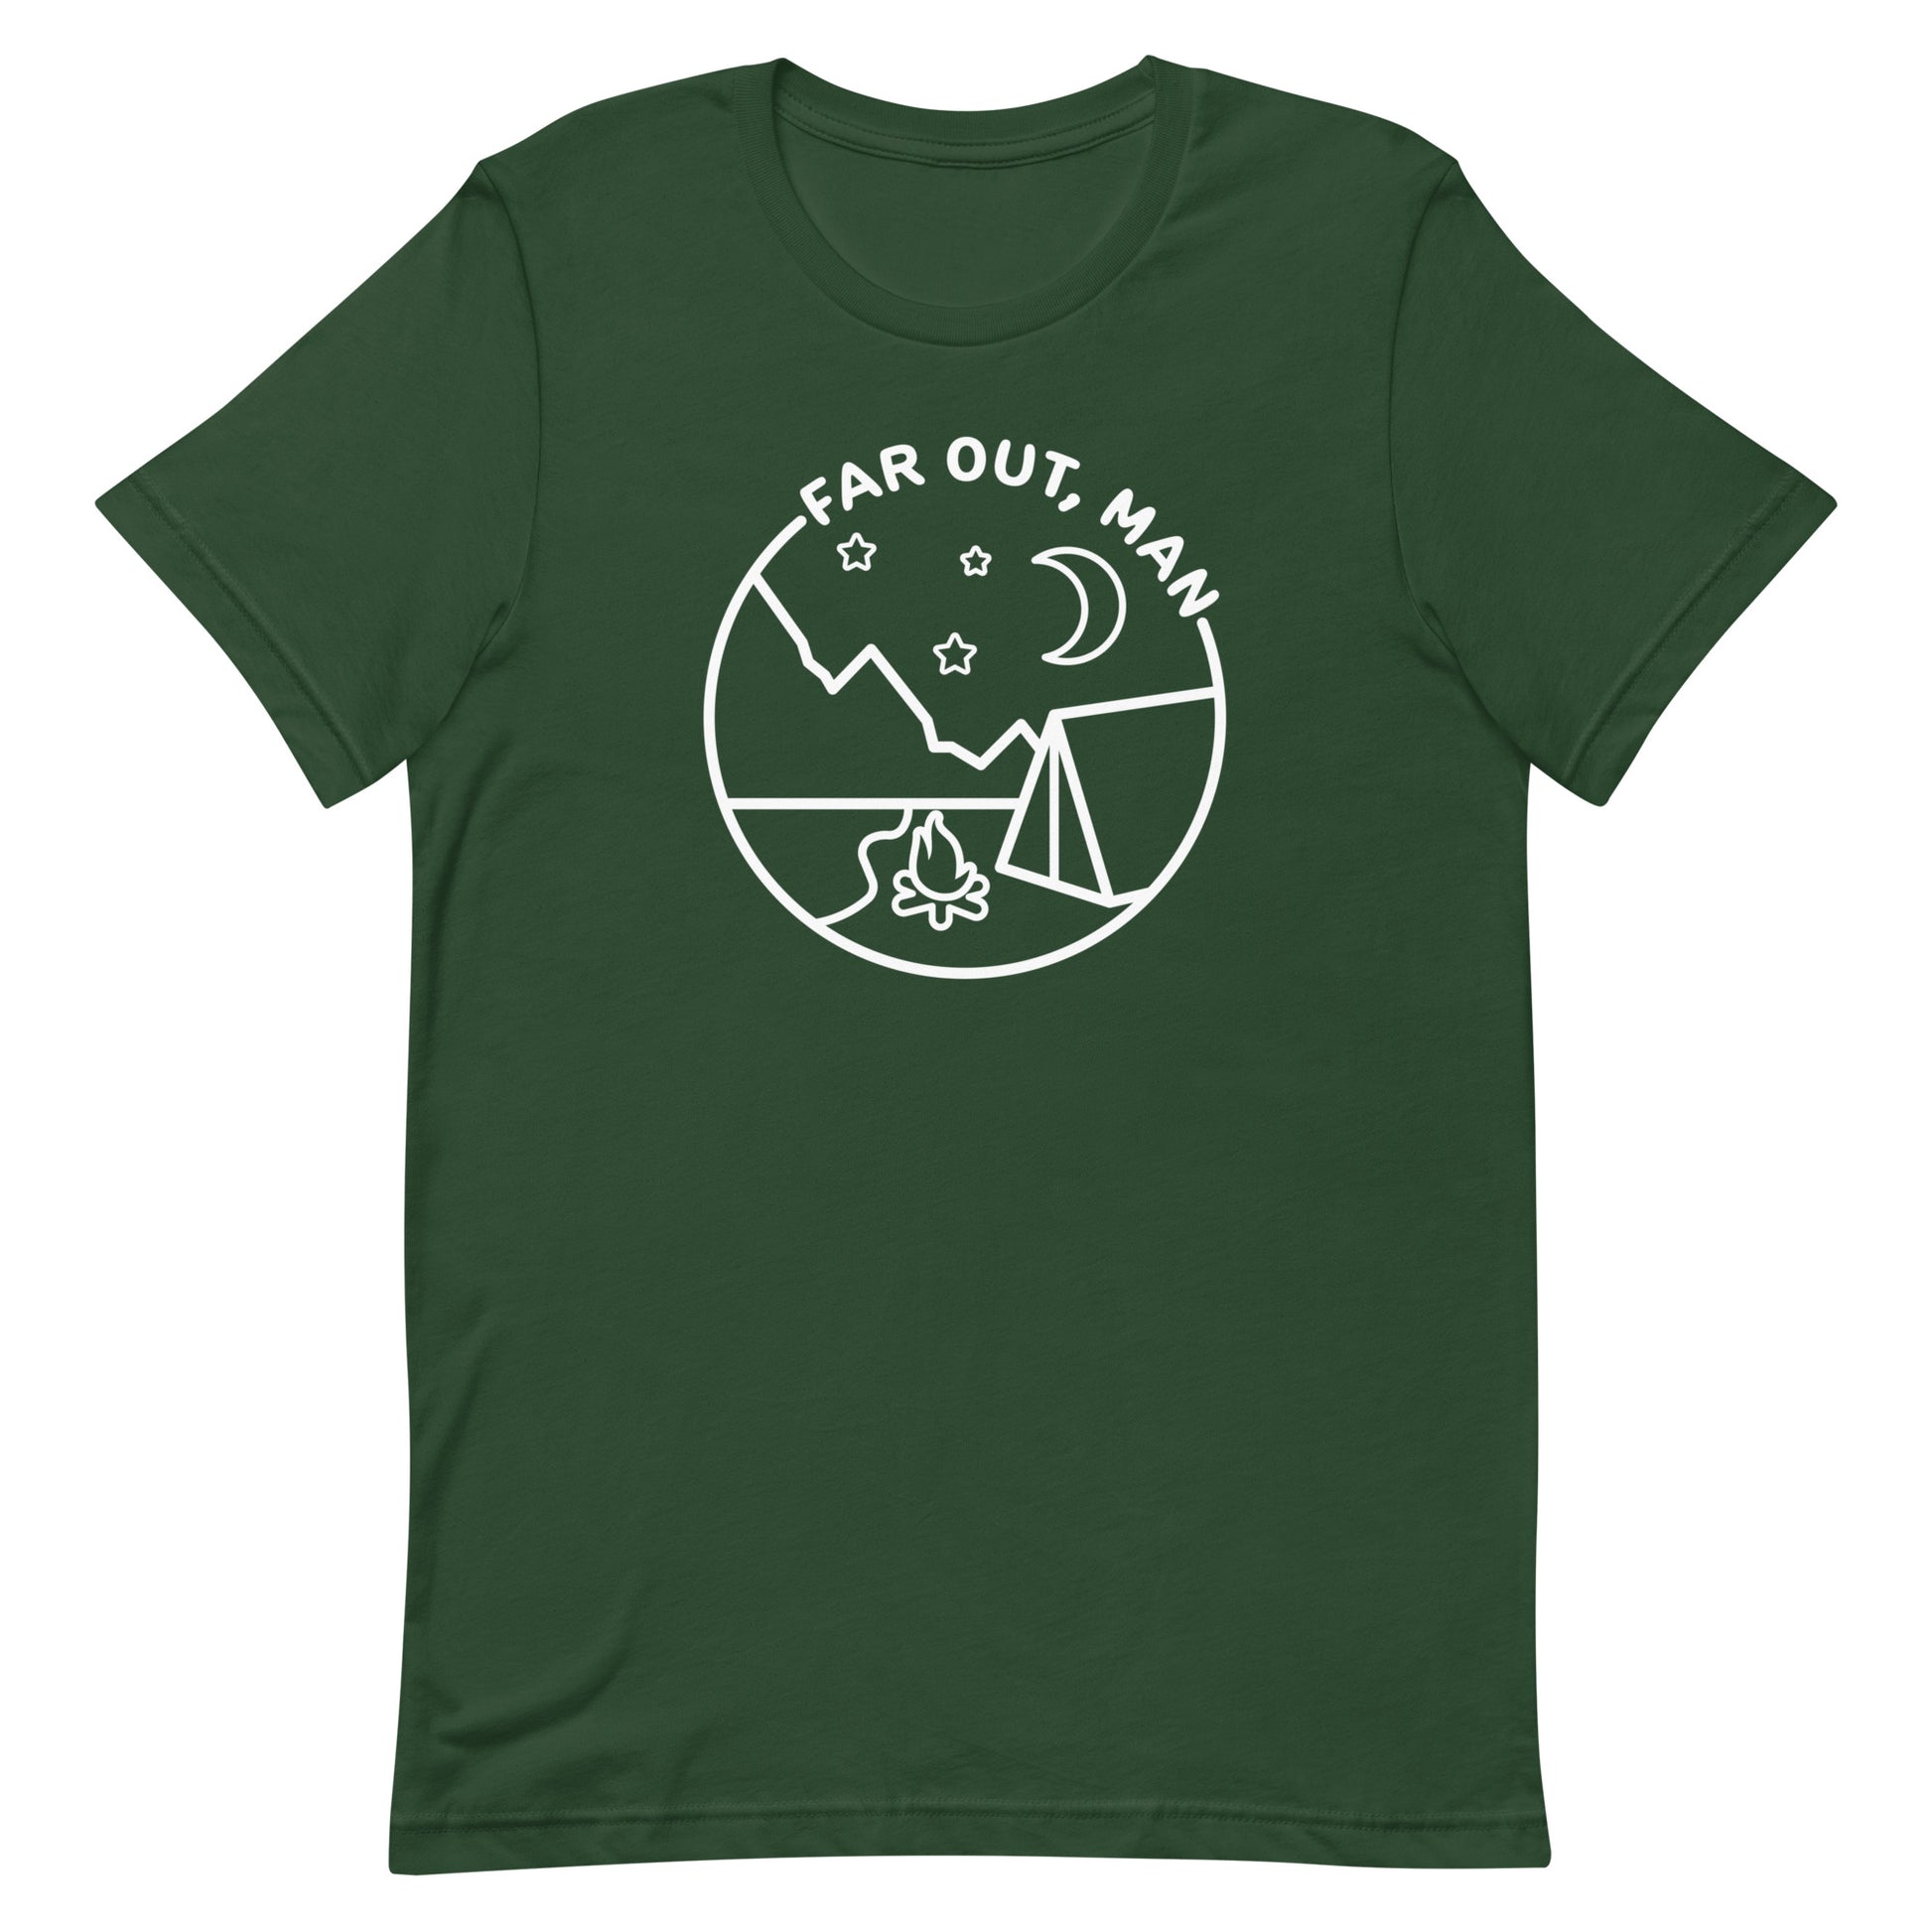 A forest green t-shirt with a white lineart graphic of a tent and campfire under a night sky. Text in an arc above the image reads "Far out, man".